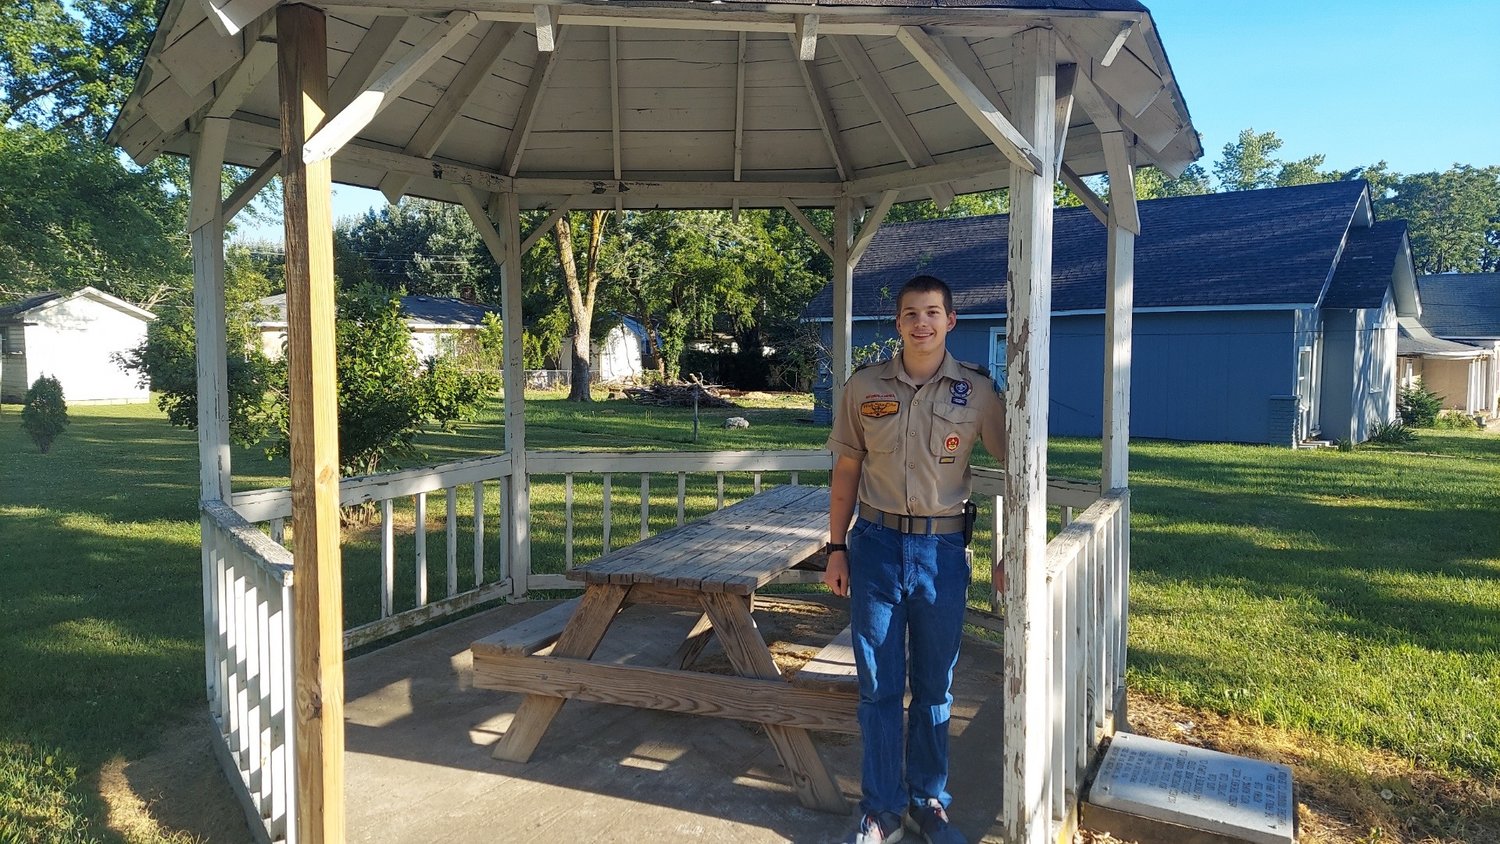 Originally built nearly 30 years ago by another Boy Scout, Logan wants to pay respect to his brother in scouts by restoring the gazebo and picnic table. To raise funds for the project a car wash will be held at O’Reillys in Marshfield on July 17 from 12:00 p.m. to 3:00 p.m.